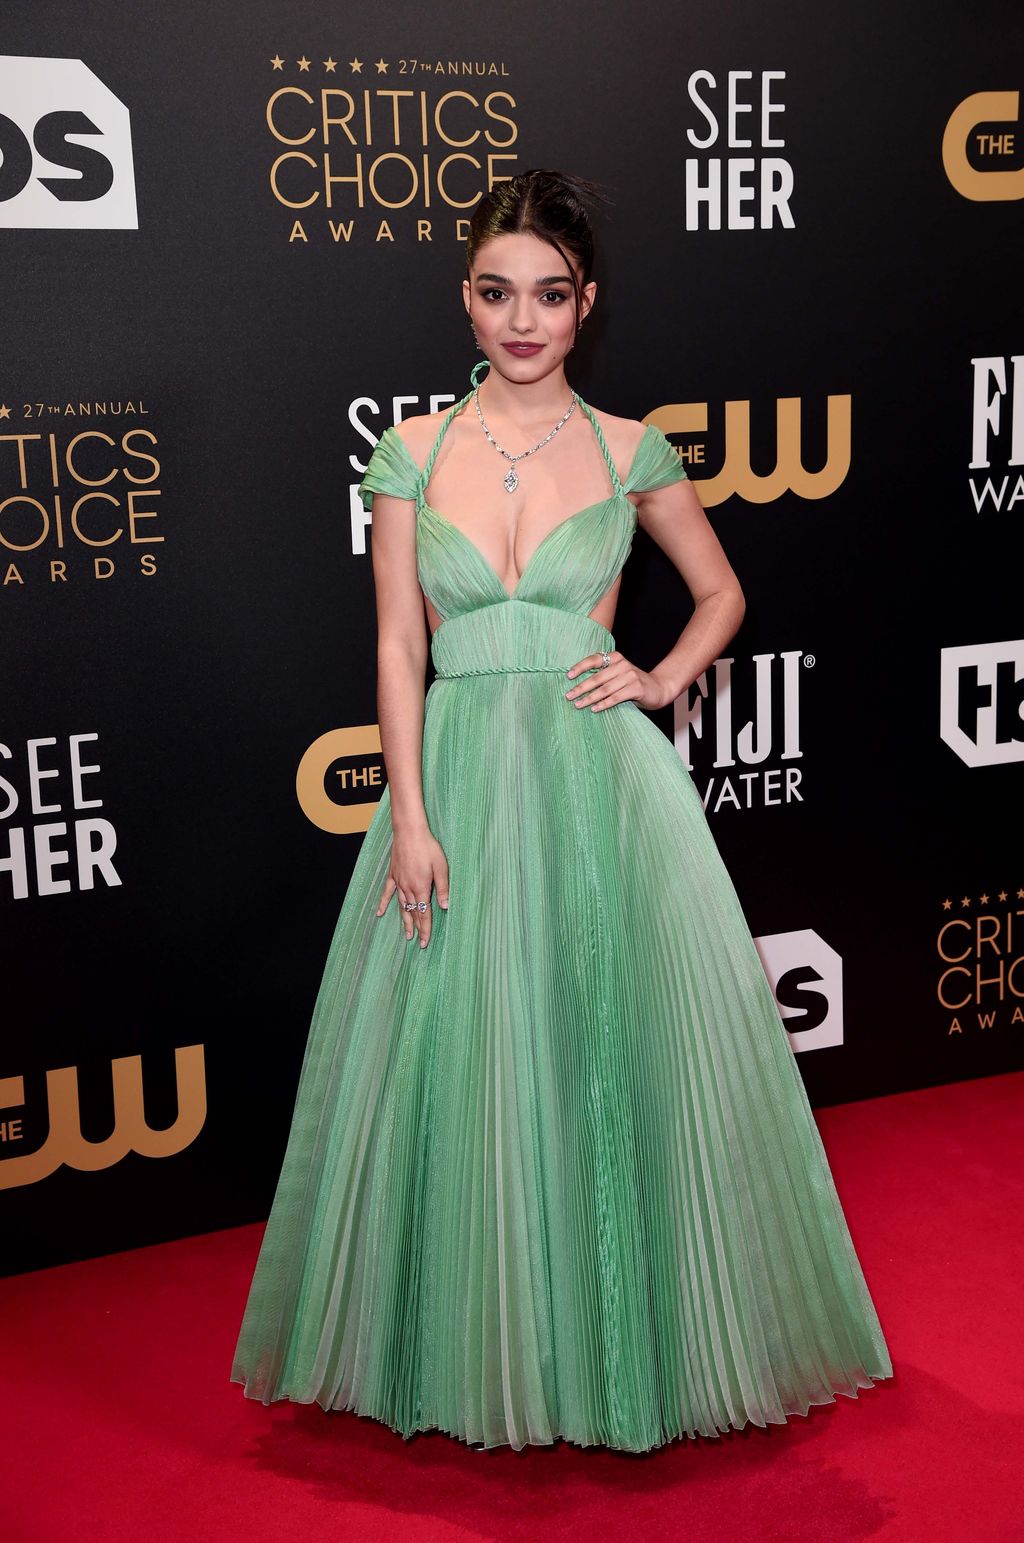 LONDON, UNITED KINGDOM - MARCH 13: Rachel Zegler attends the 27th Annual Critics Choice Awards at The Savoy on March 13, 2022 in London, United Kingdom. (Photo by Eamonn M. McCormack/Getty Images for Critics Choice Association)